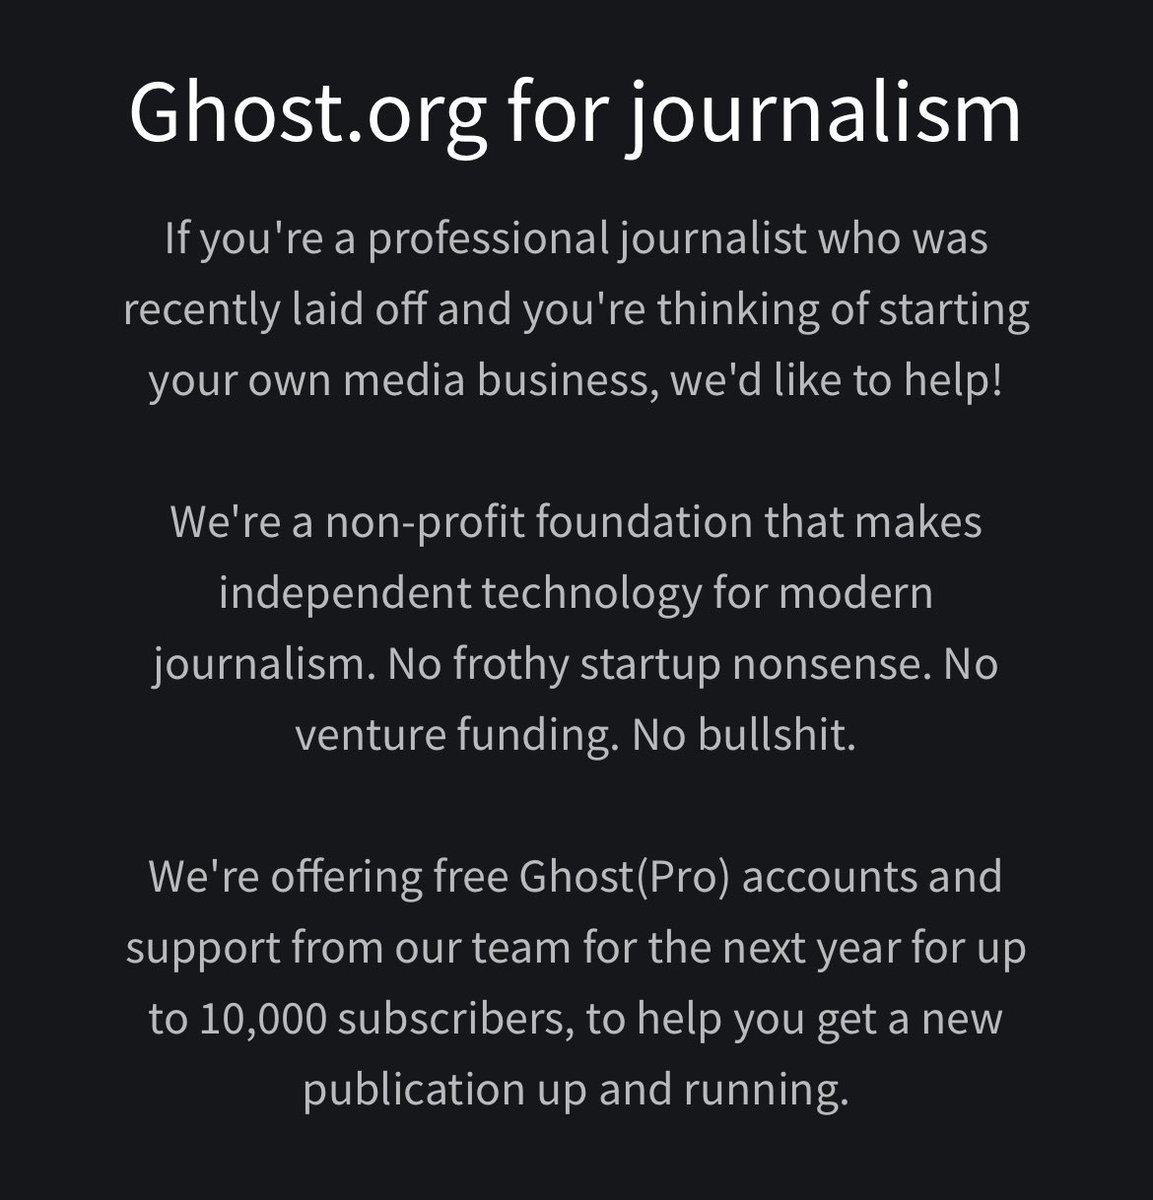 I’m really glad I chose @Ghost when Drowned in Sound left Substack and great to see this initiative to support journalists impacted by the recent layoffs Fill in this form teamghost.typeform.com/journalism RT to spread the word